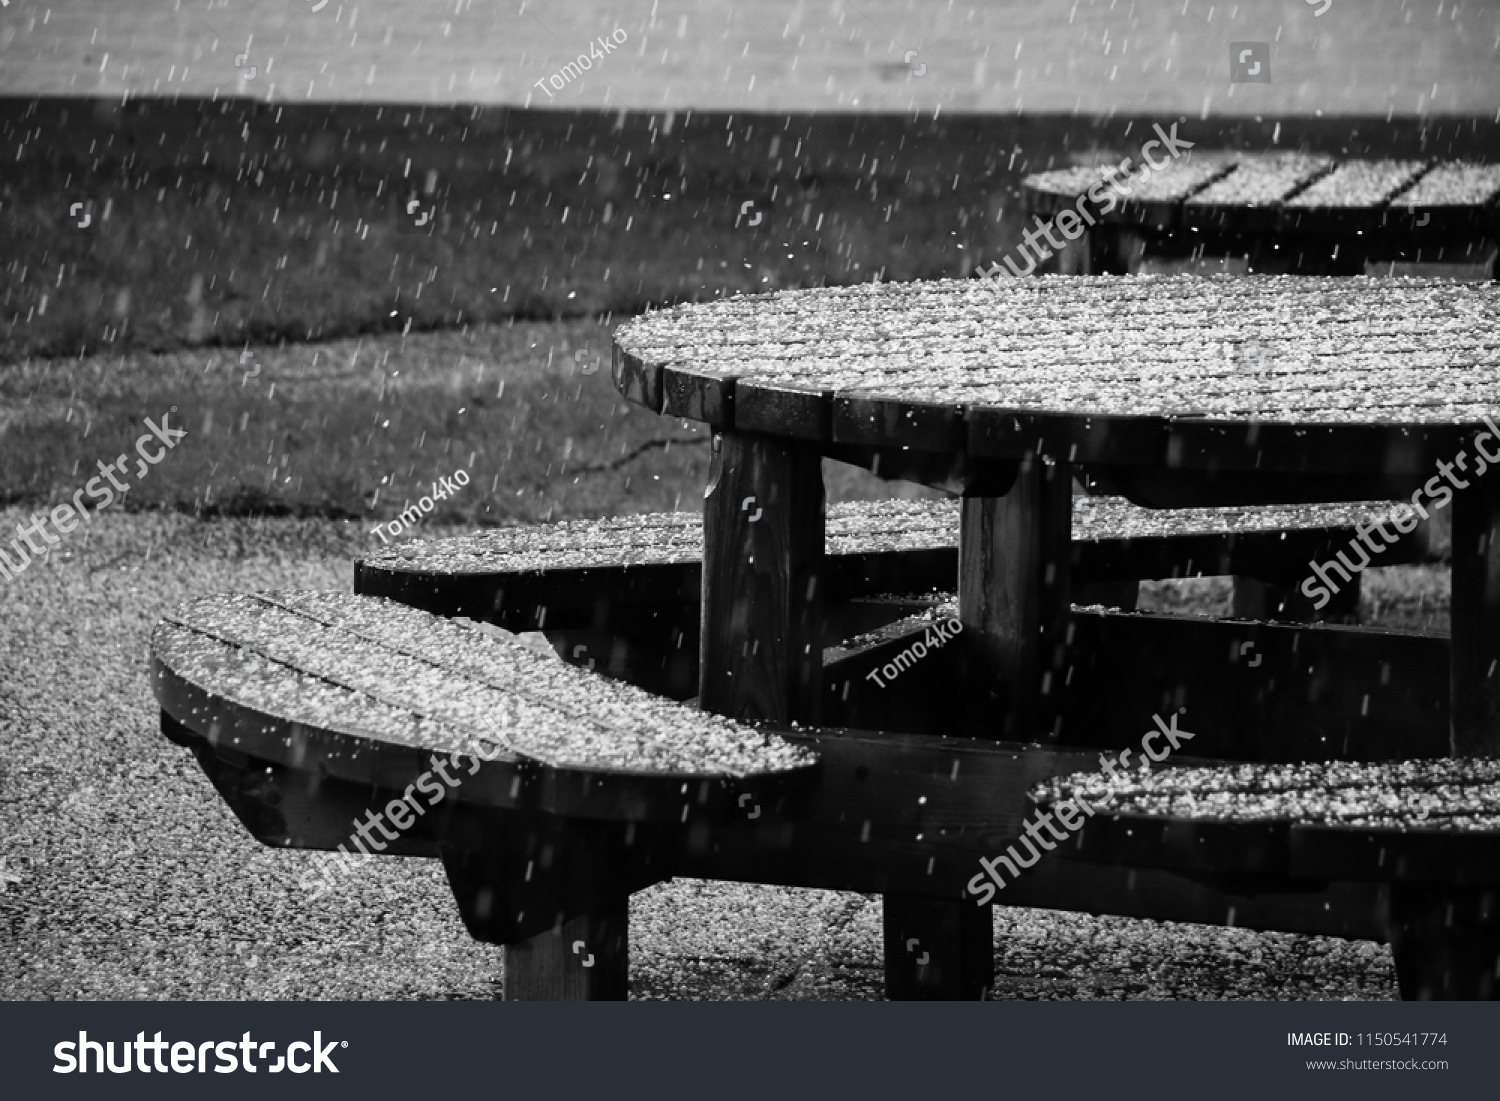 Wooden table with seats under a downpour. Sad and romantic, monochromatic picture.  #1150541774